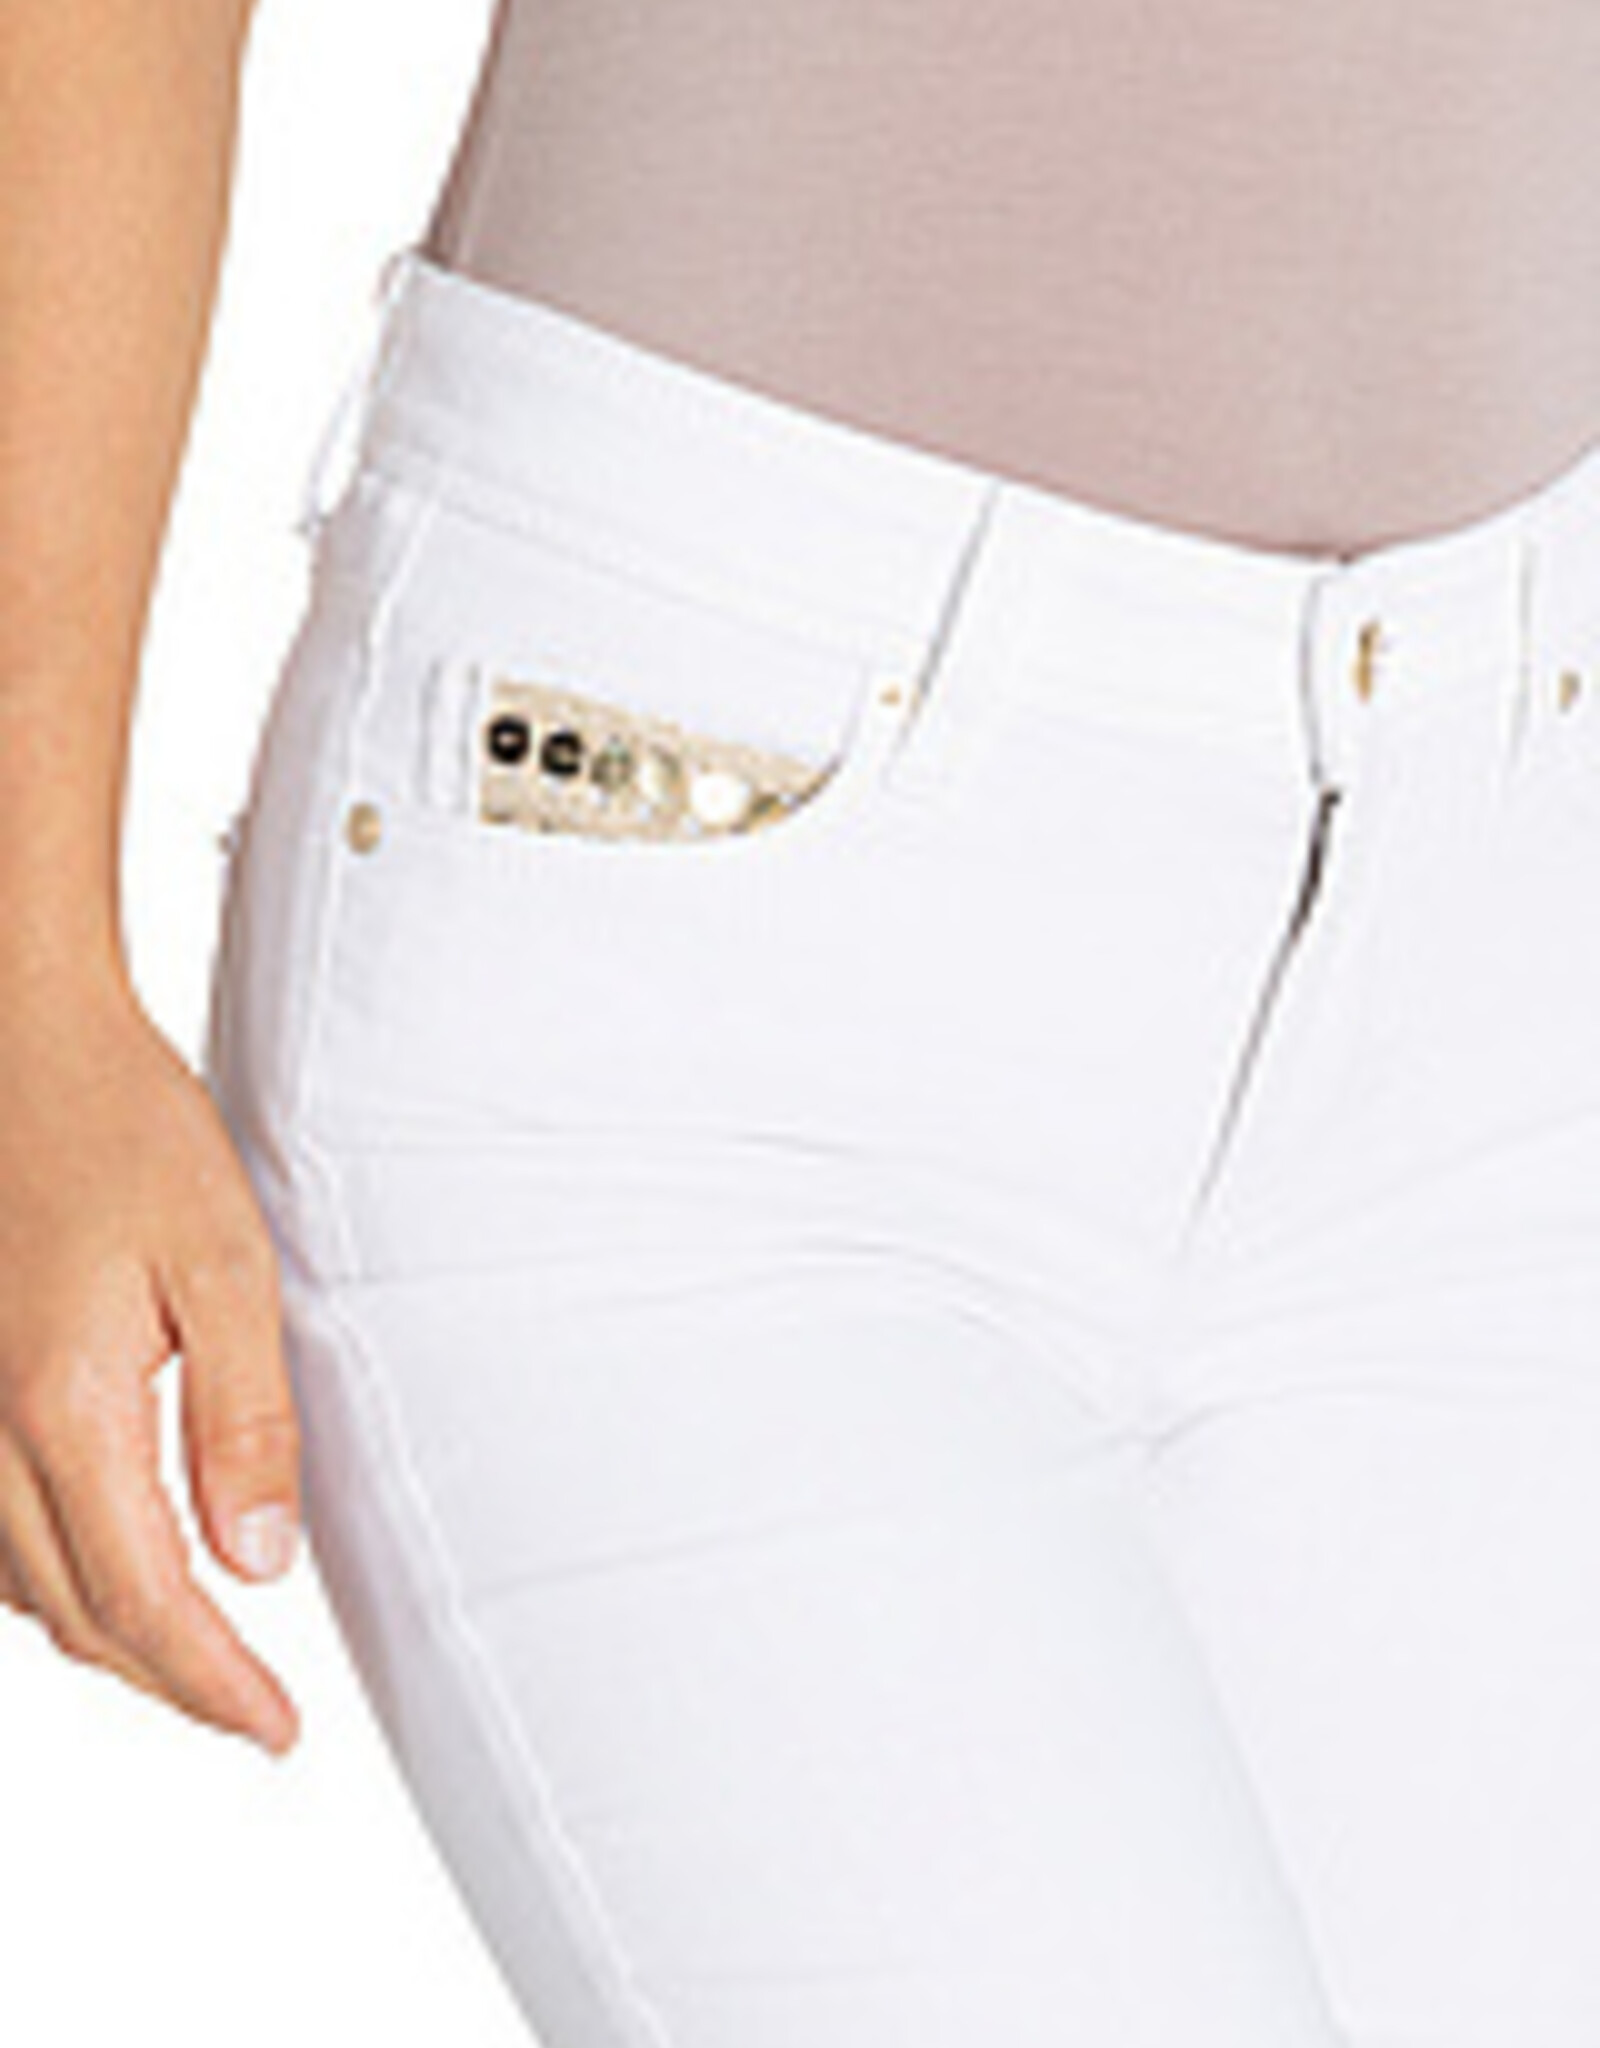 Cambio Jeans Piper Short Softwash Fringe White